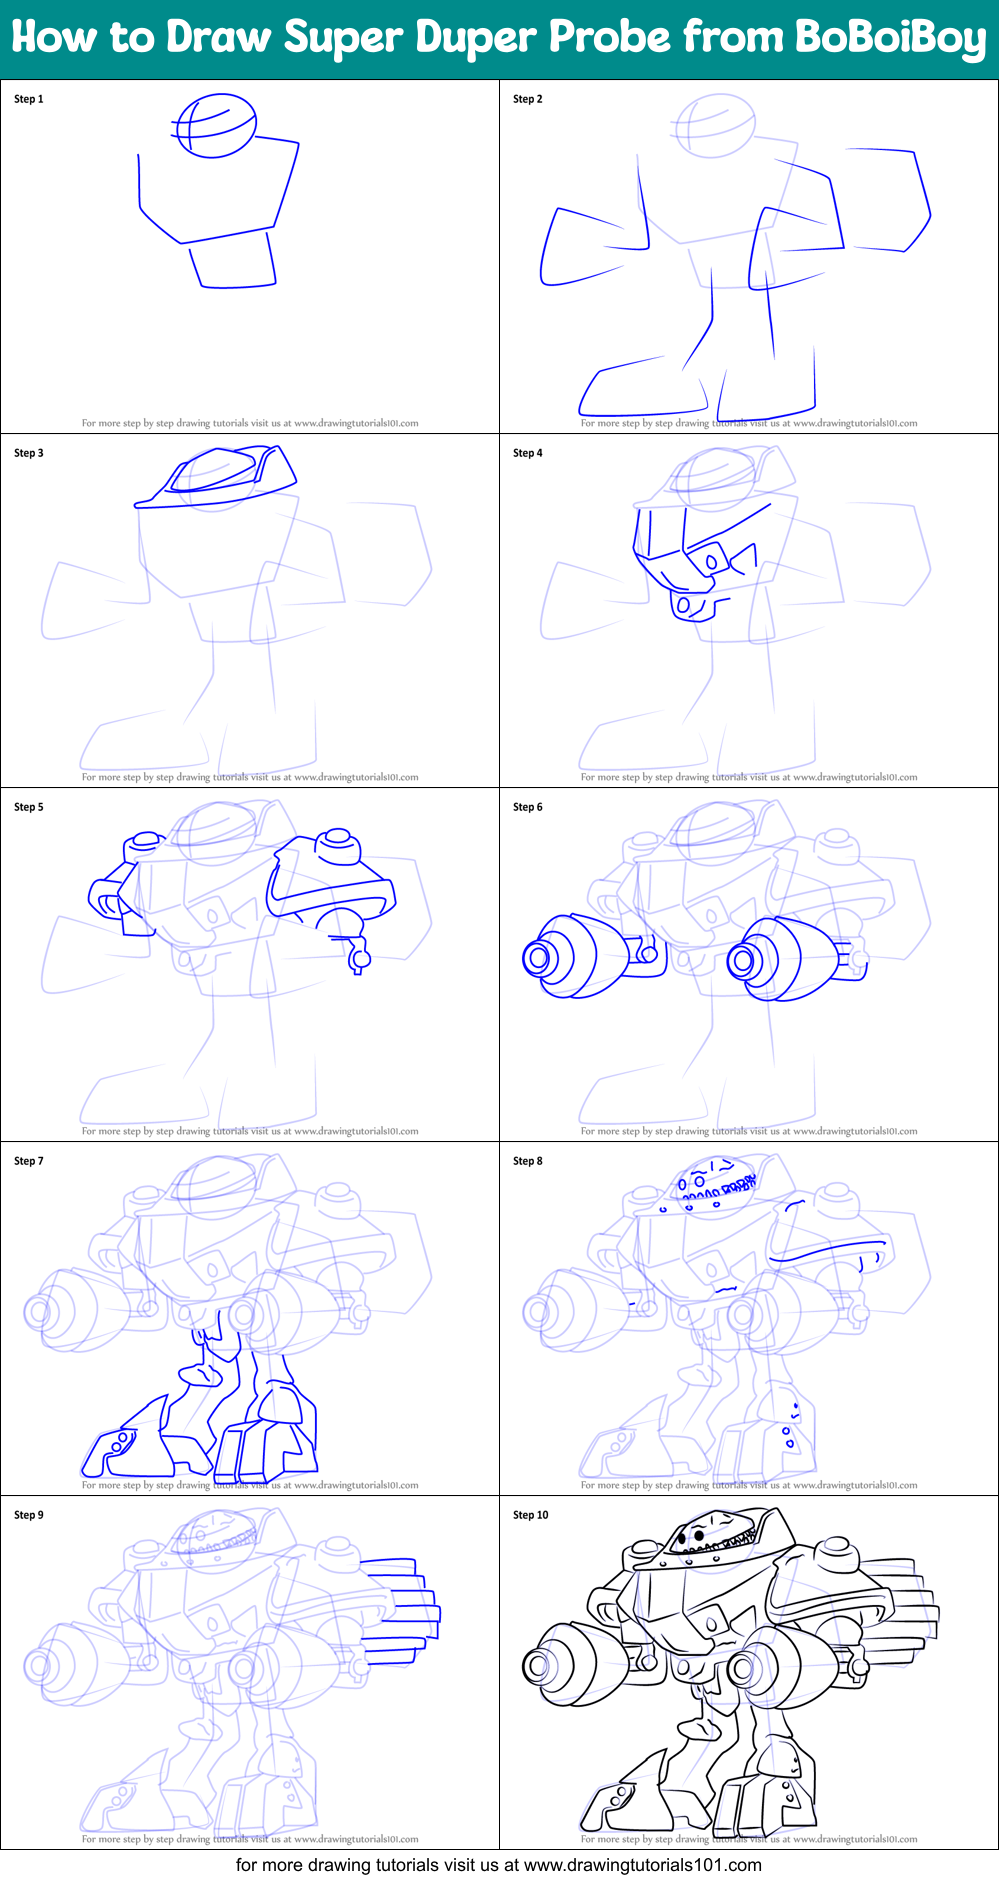 How to Draw Super Duper Probe from BoBoiBoy printable step by step